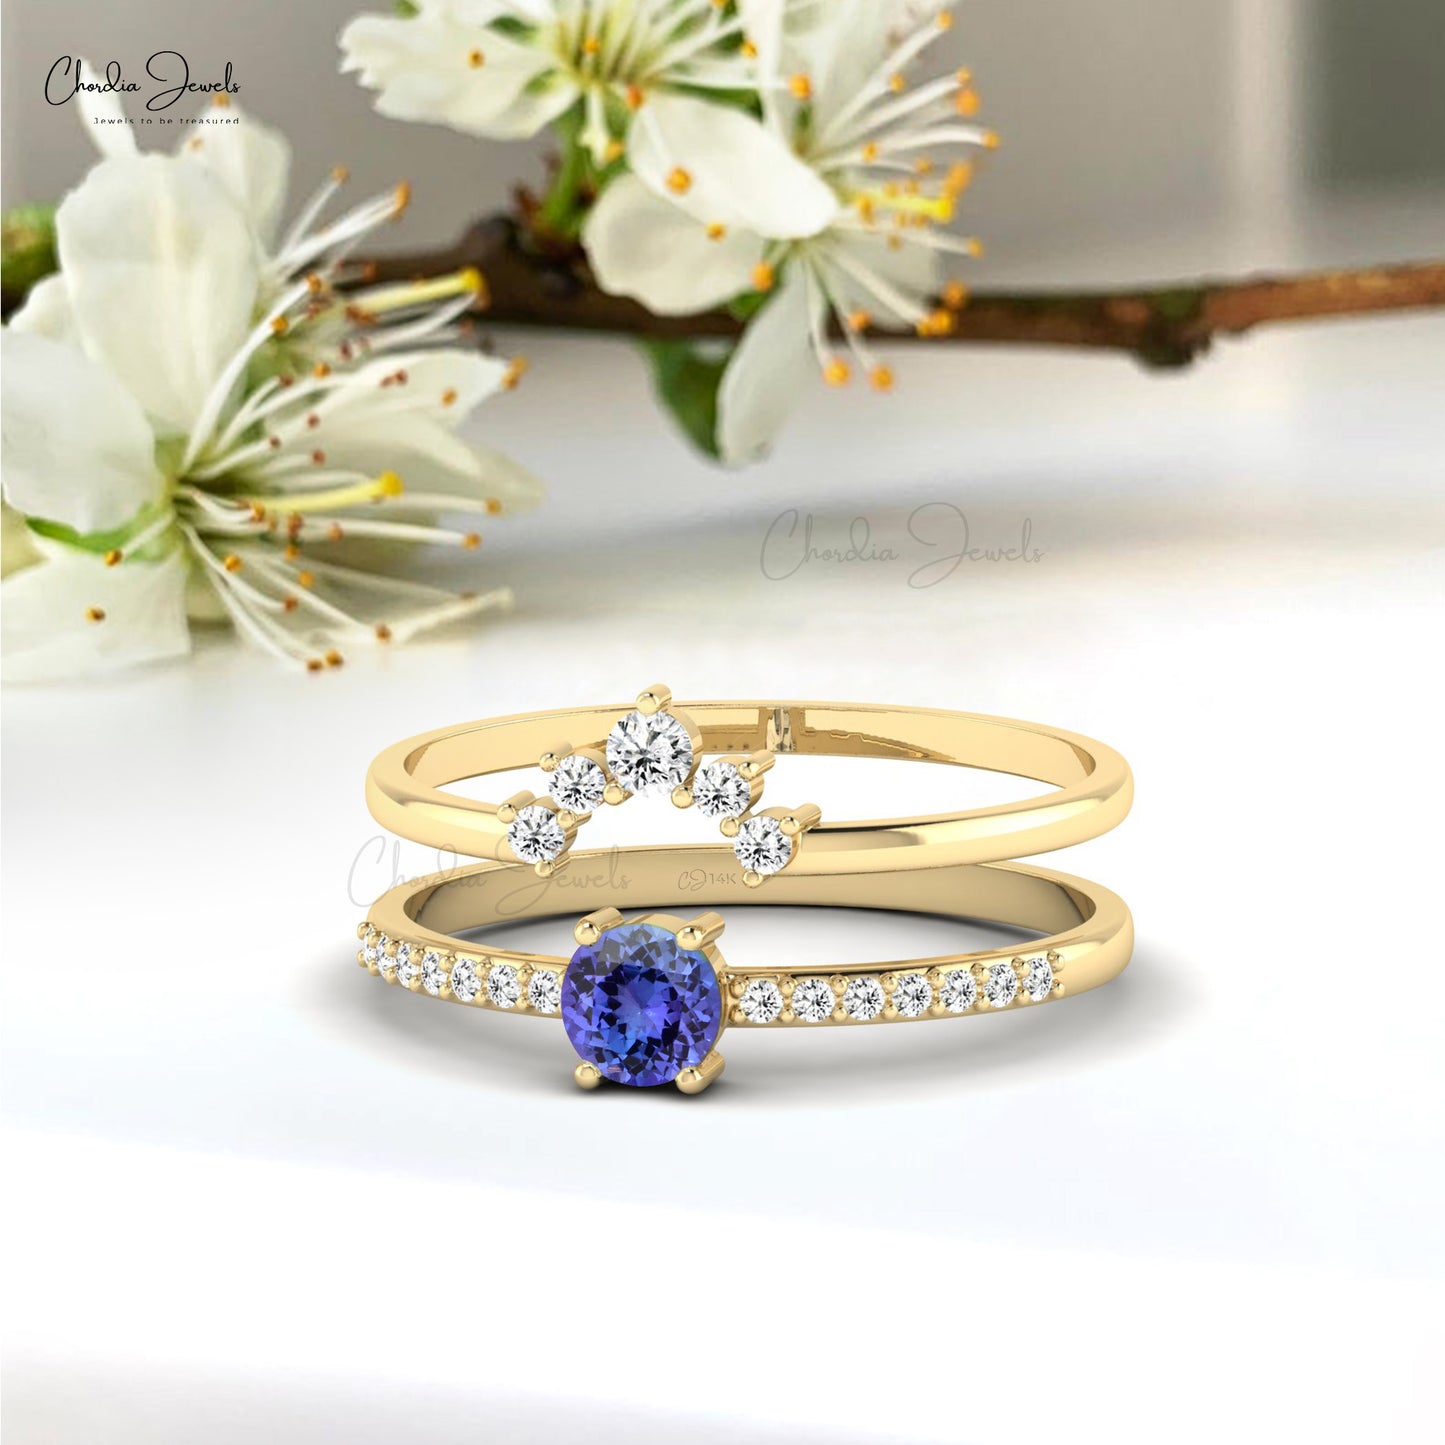 Natural Tanzanite Stackable Wedding Ring Genuine 14k Real Gold Minimalist Ring 4mm Round Cut Gemstone Jewelry For Valentine's Day